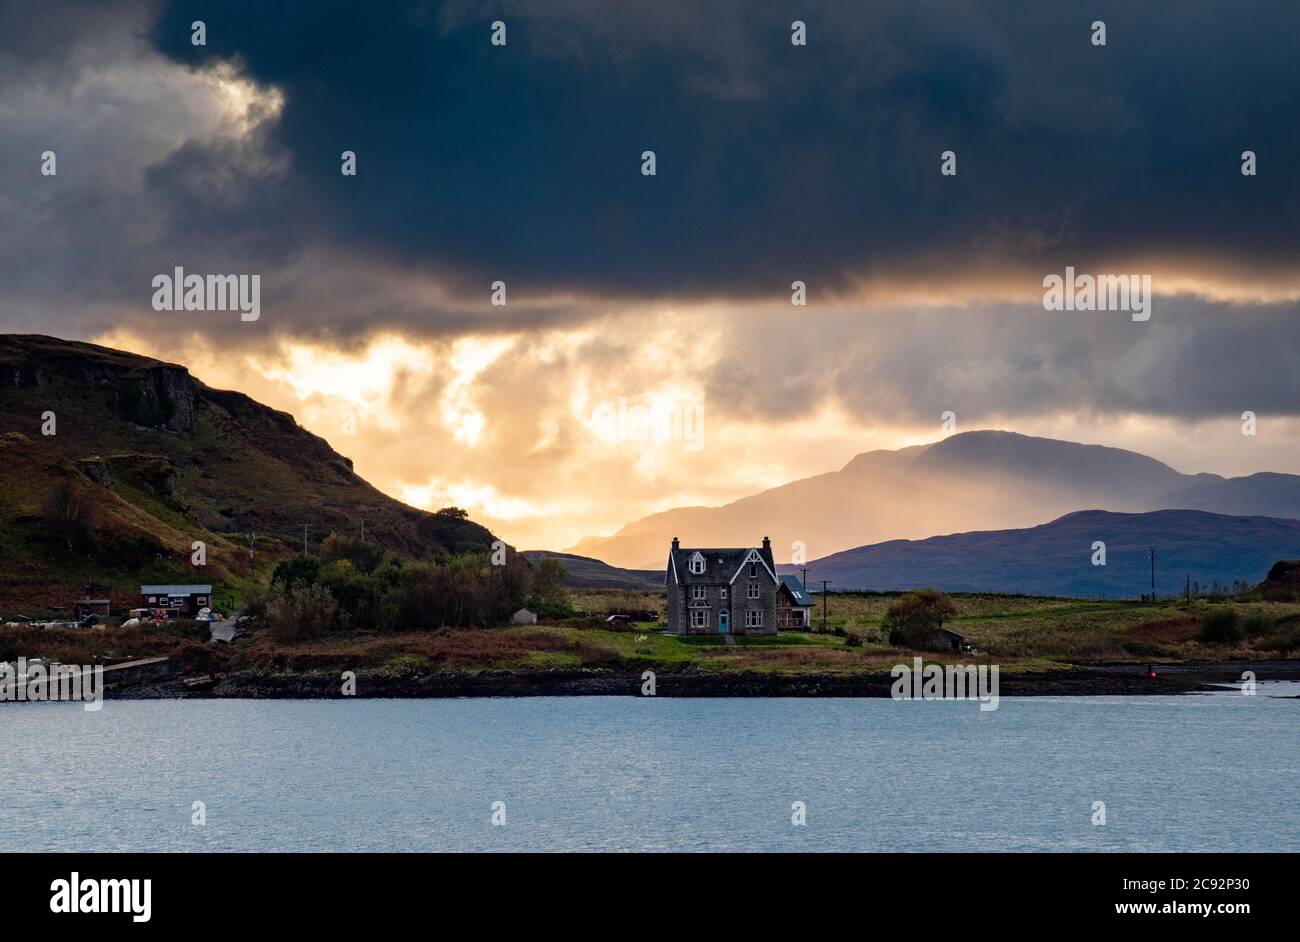 Kerrera, an island in the Scottish Inner Hebrides near Oban, Argyll and Bute. Stock Photo